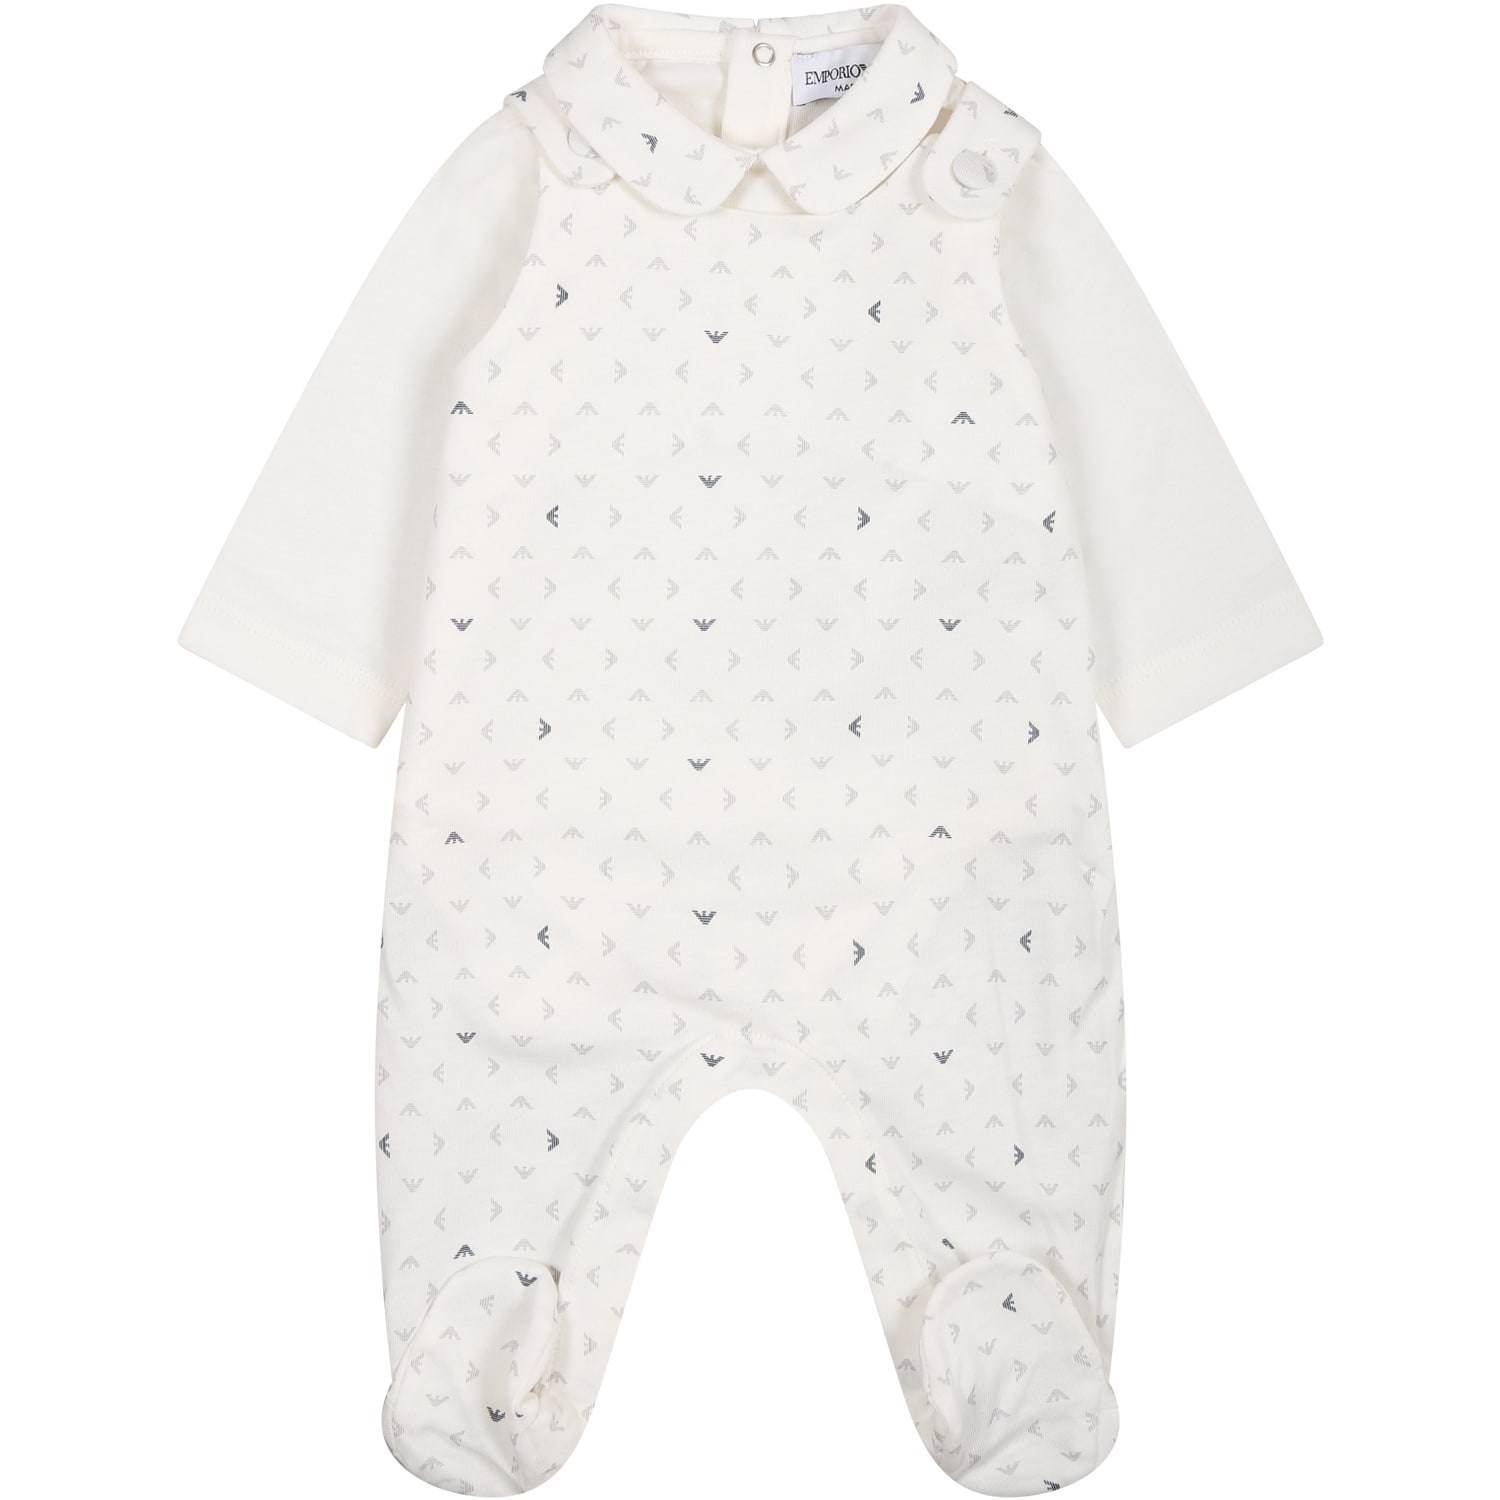 Armani Collezioni White Set For Baby Boy With Iconic Eagles